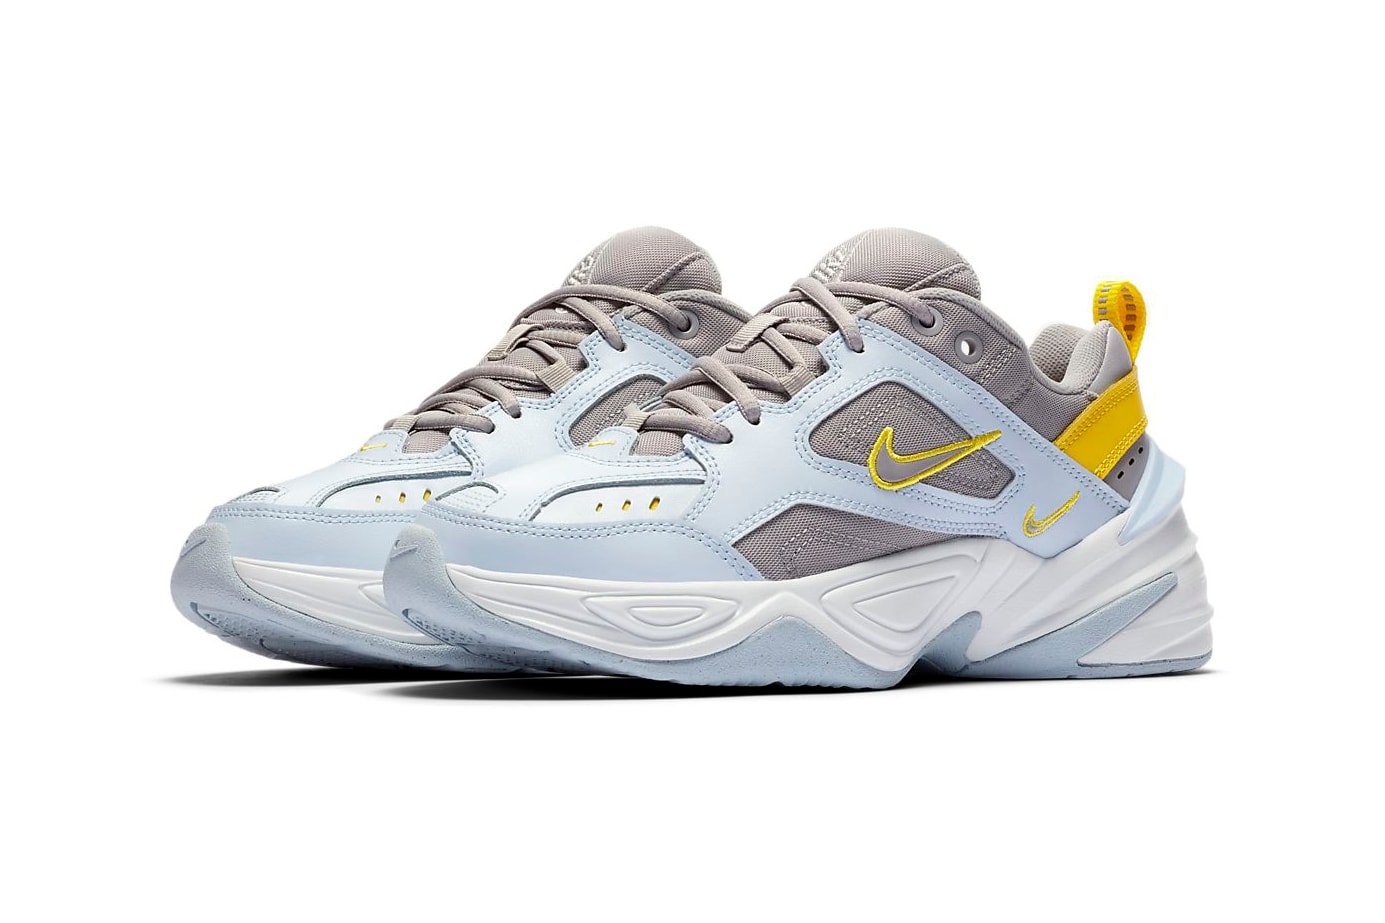 Nike M2K Tekno in Half Blue Atmosphere Grey Chrome Yellow Sneakers Trainers 